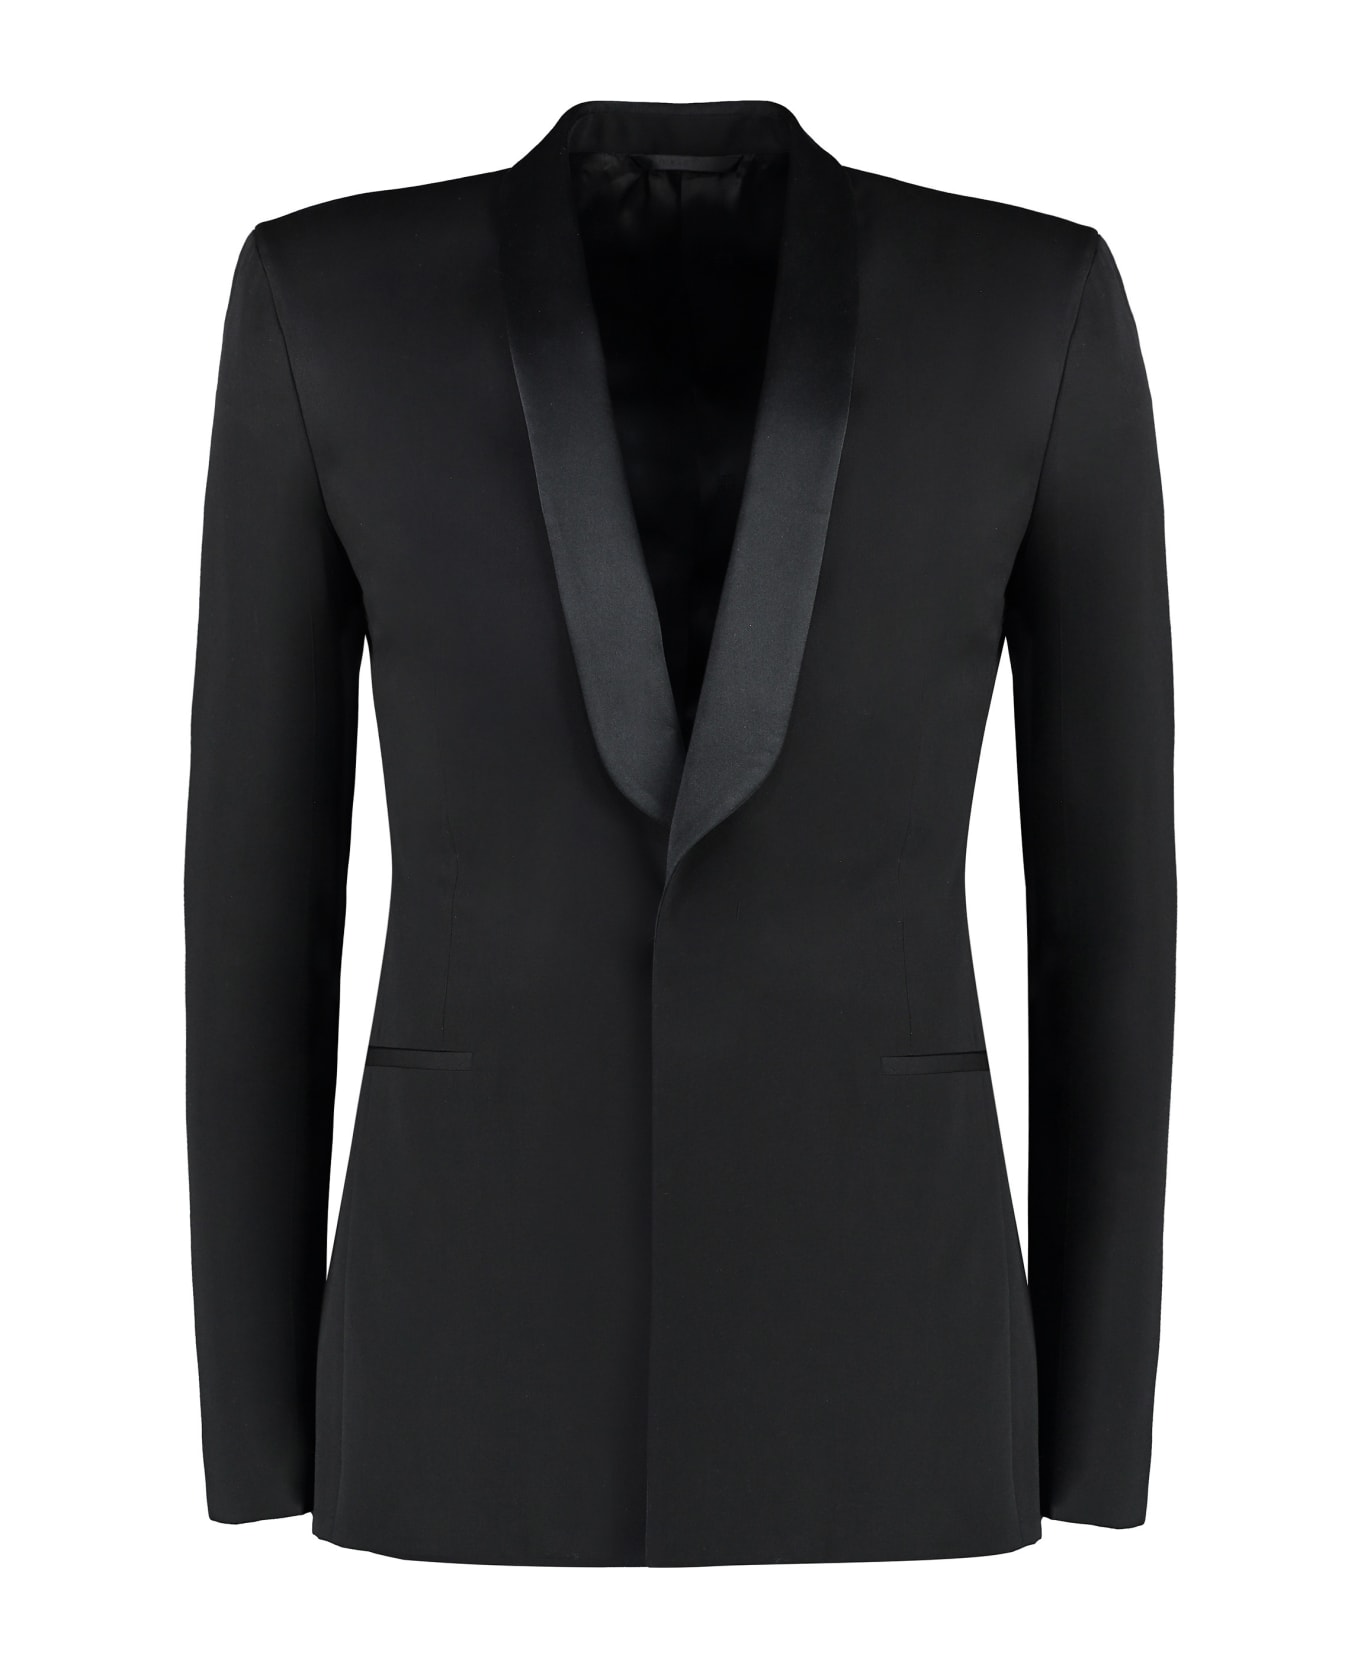 Givenchy Single-breasted One Button Jacket - black コート